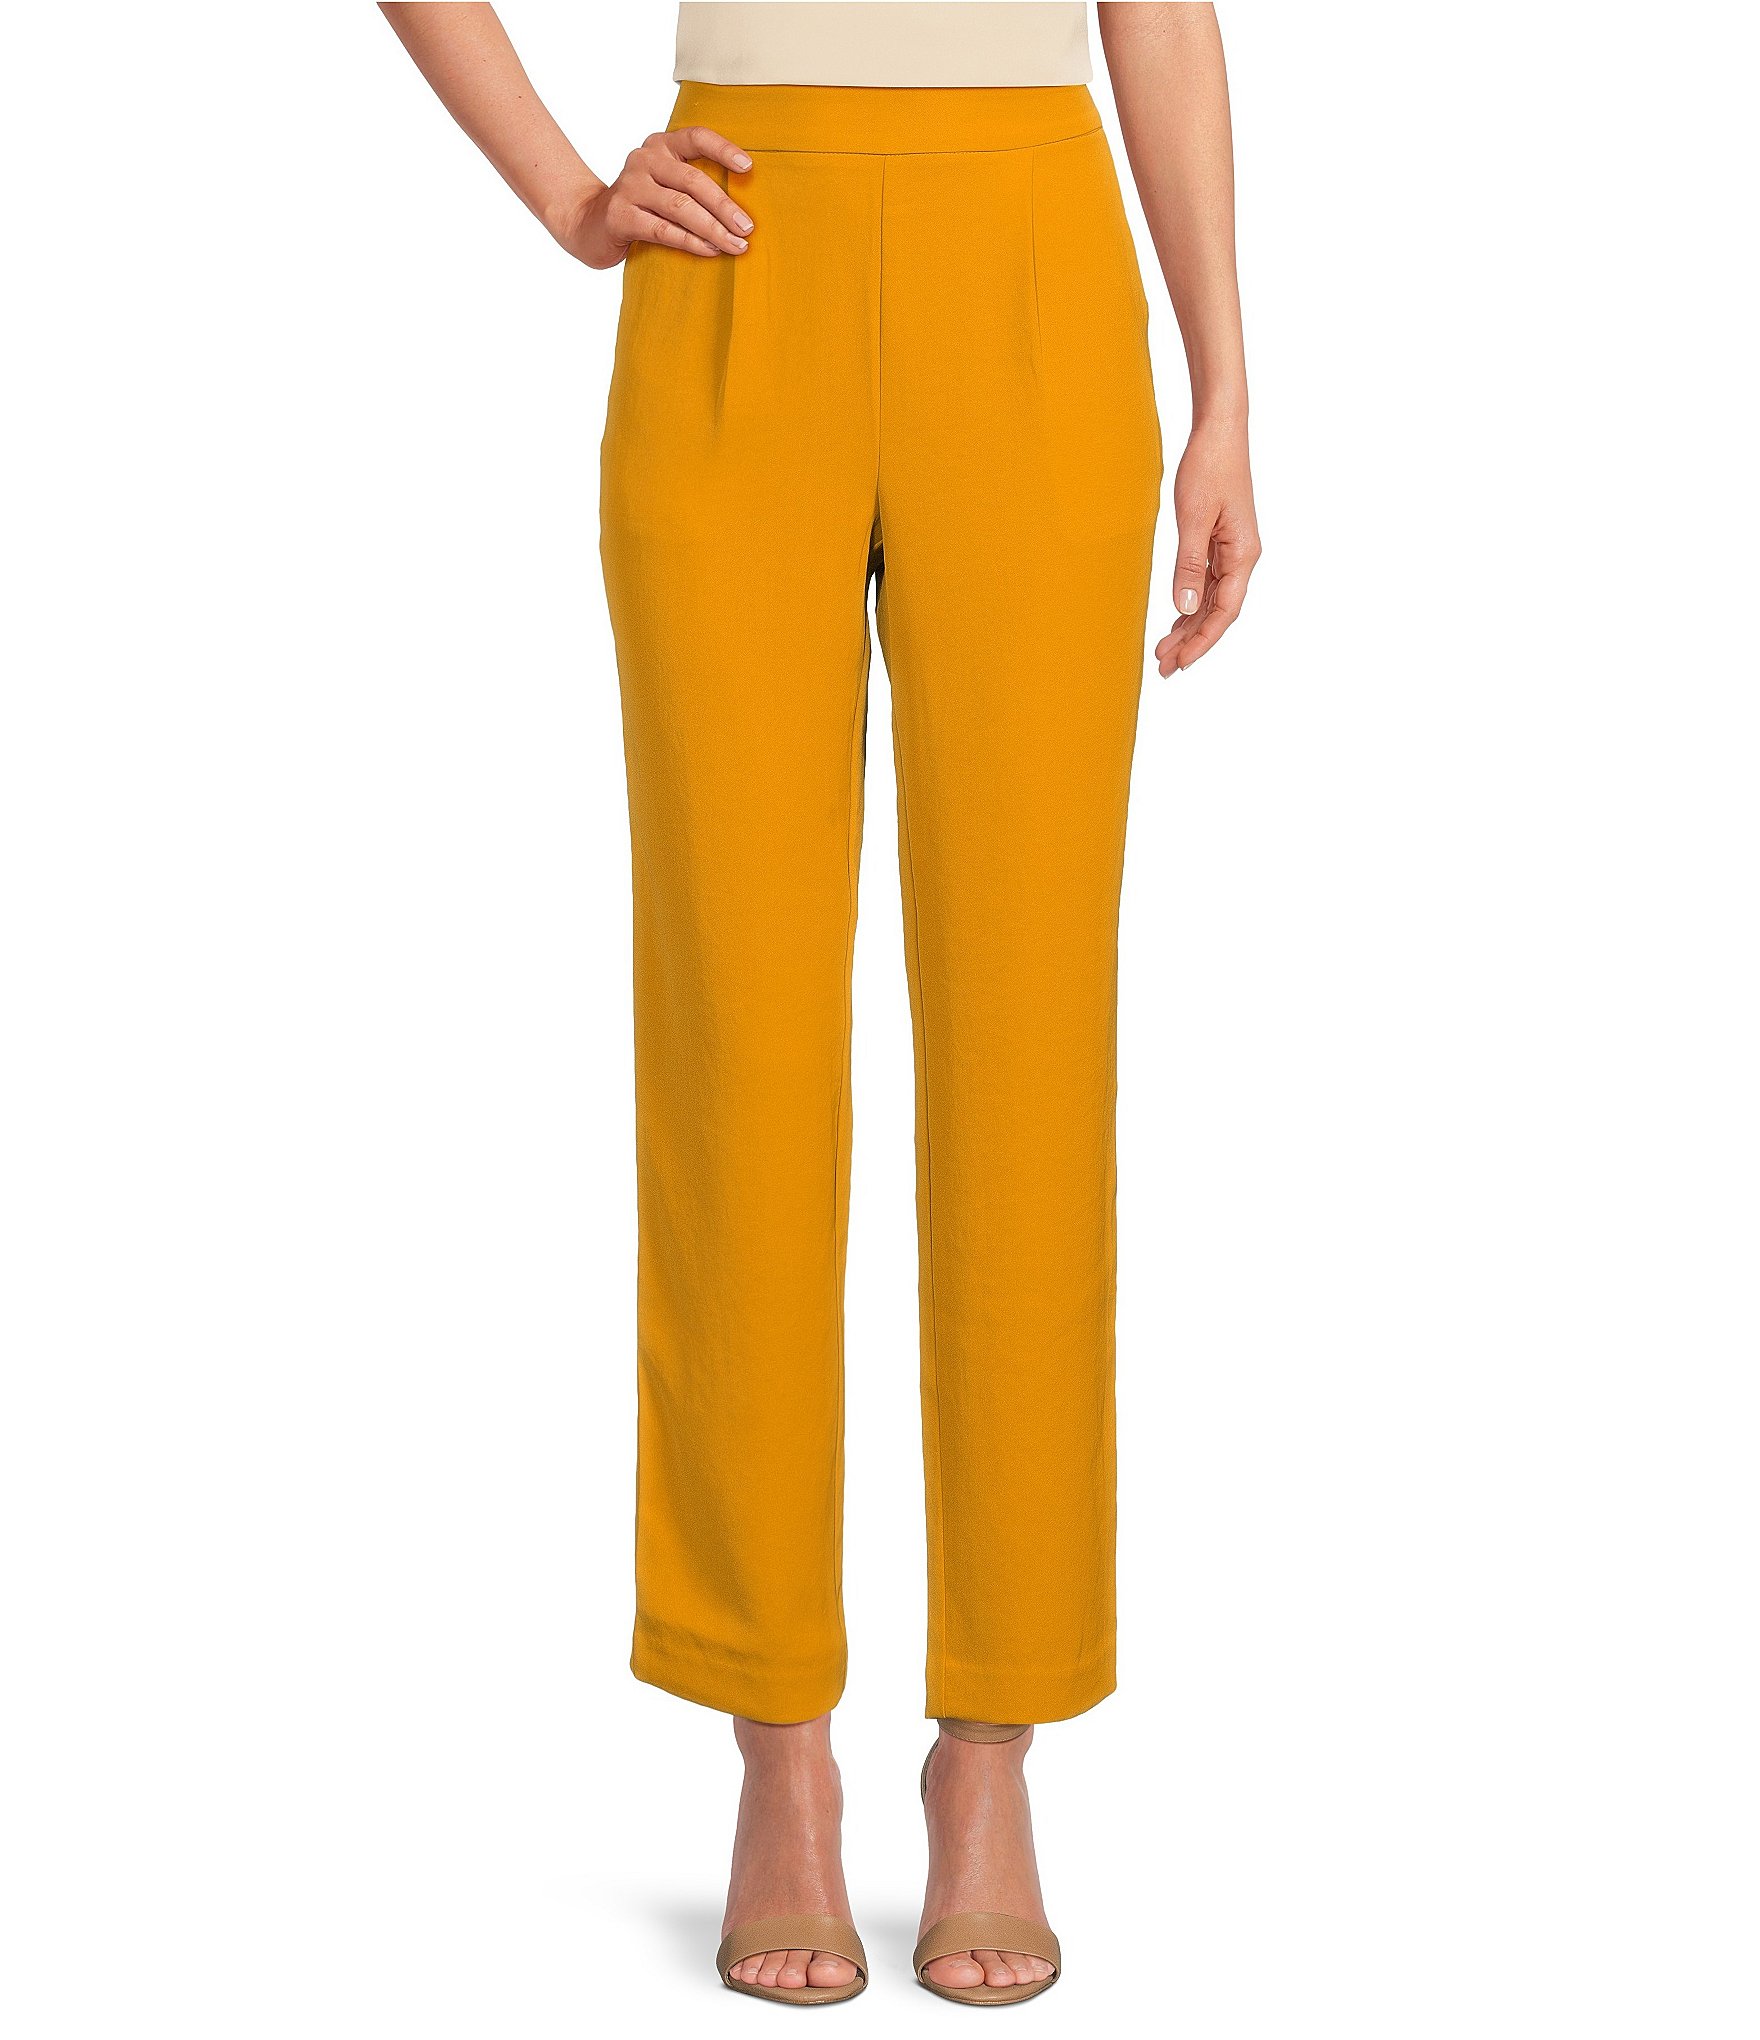 Yellow Trousers - Buy Yellow Trousers Online in India